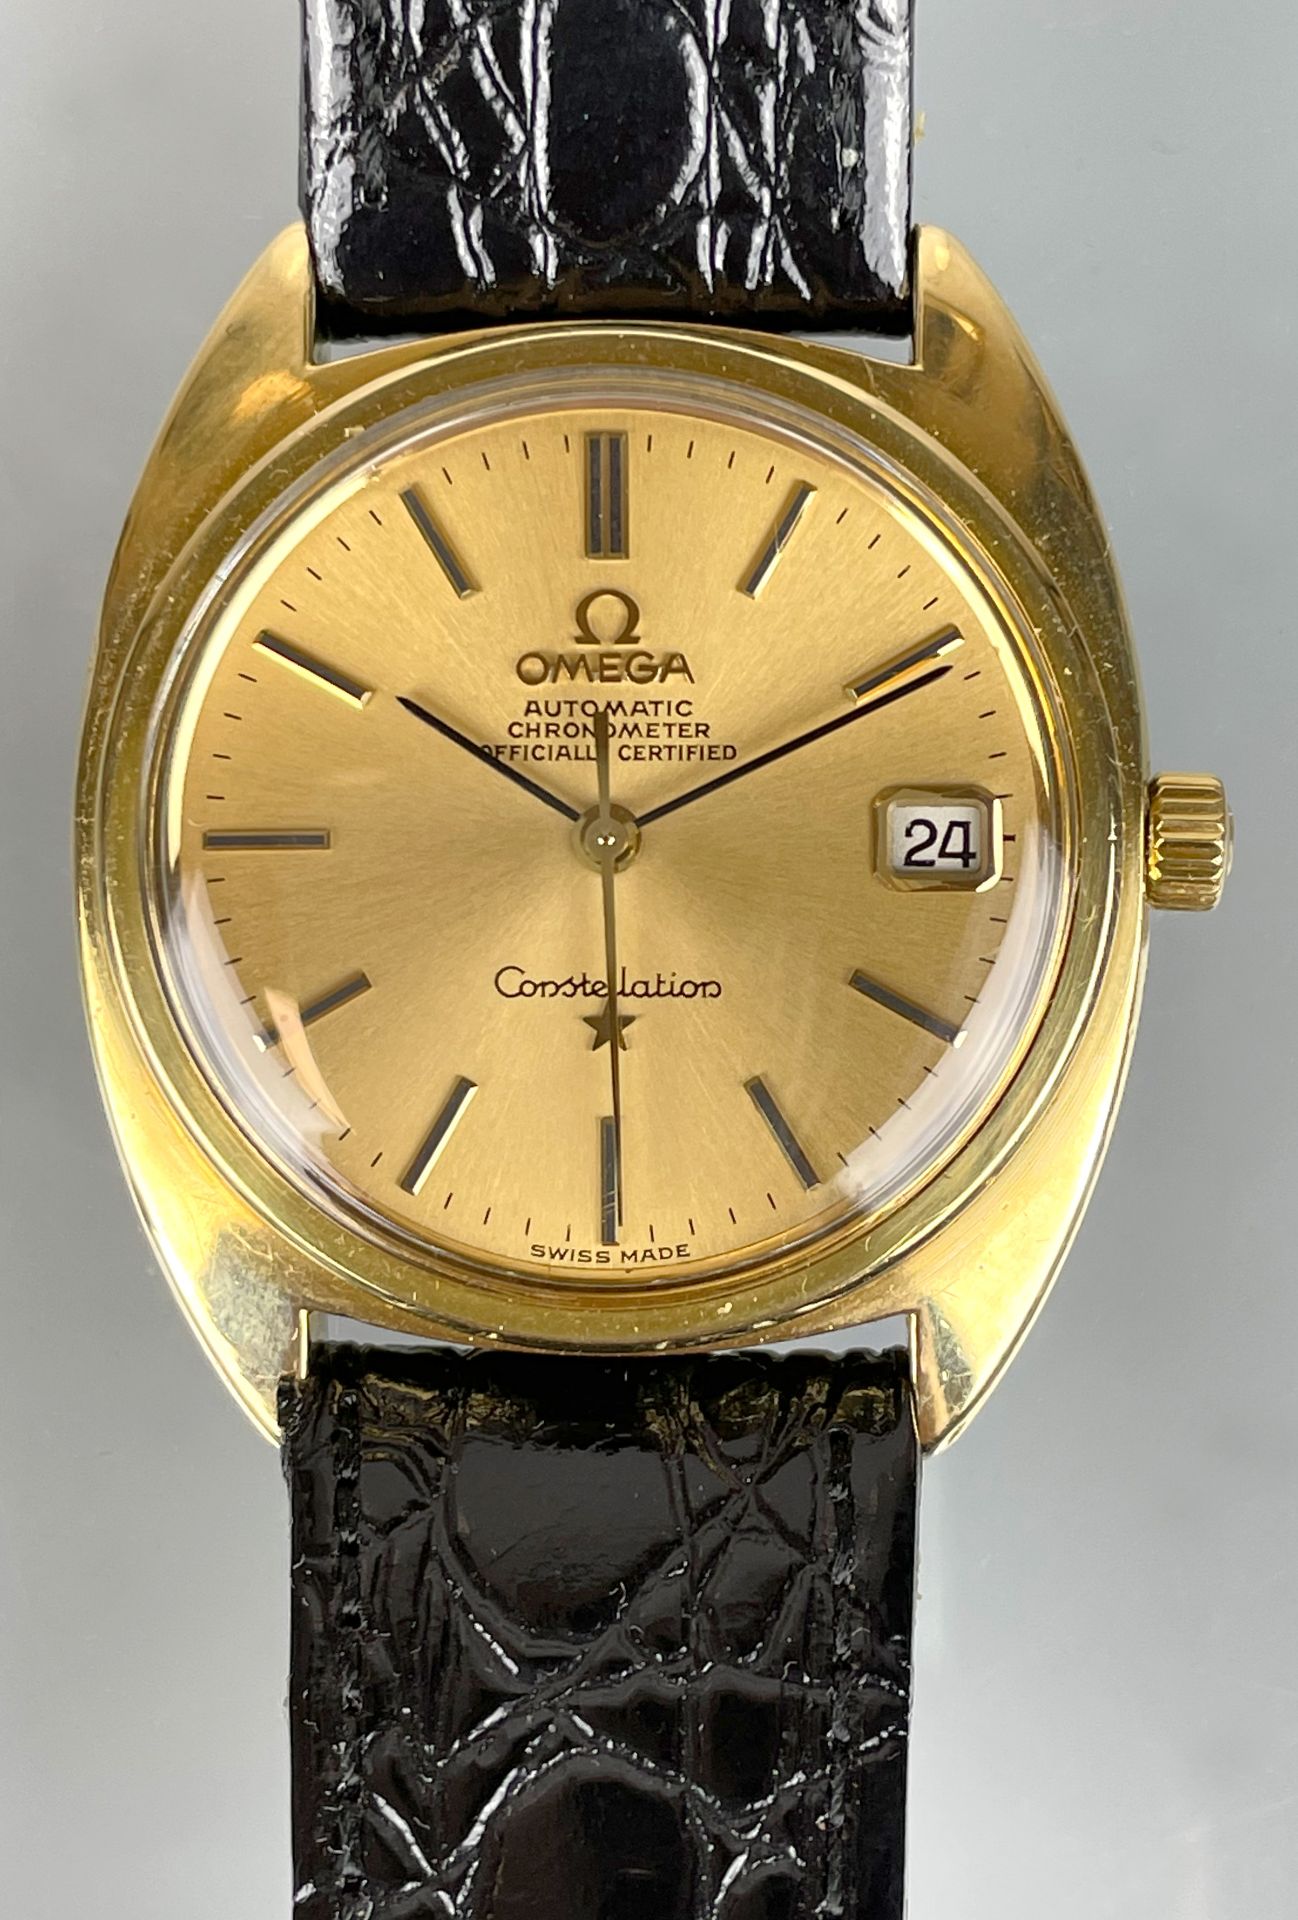 Men's wristwatch OMEGA Constellation. Chronometer. Automatic. Swiss. Vintage. - Image 2 of 7